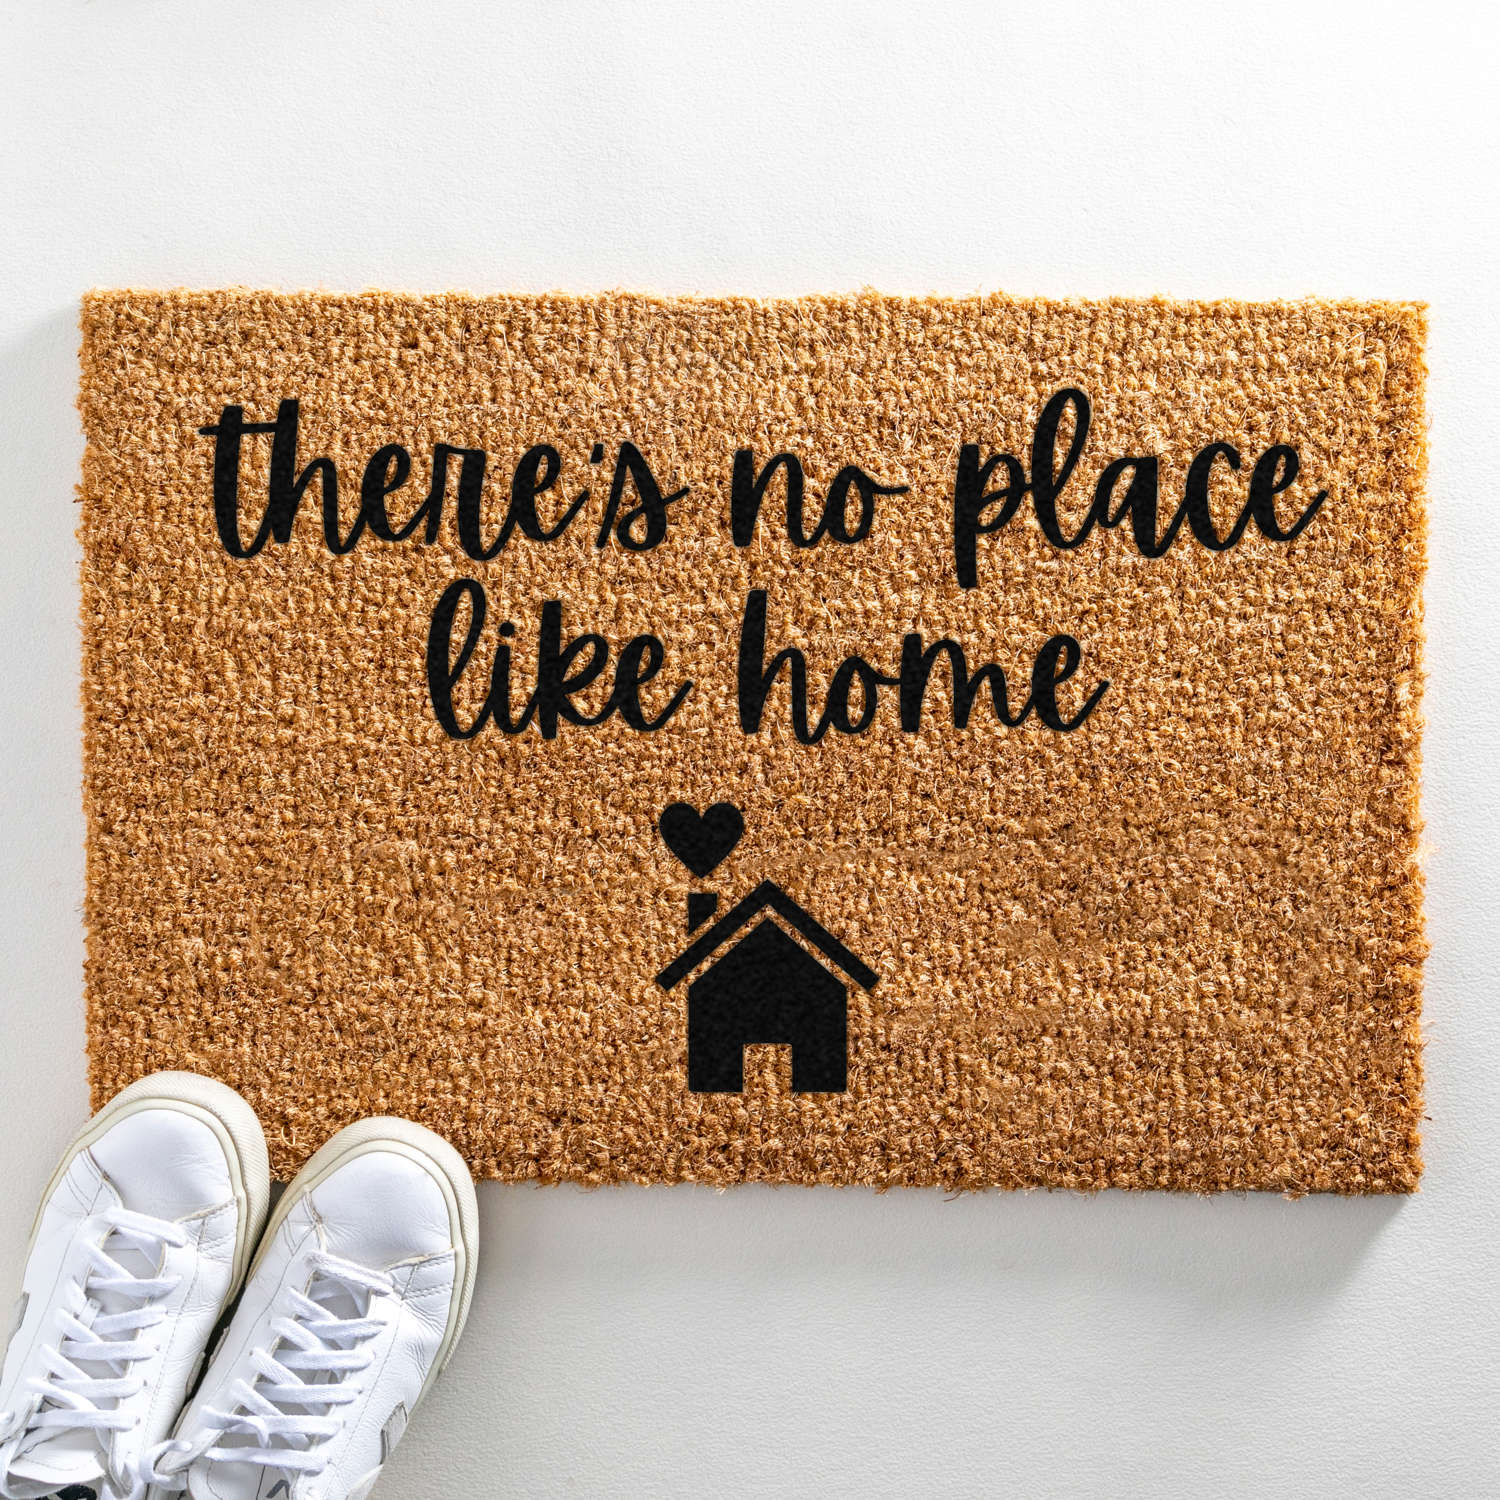 There's no place like home design standard size doormat